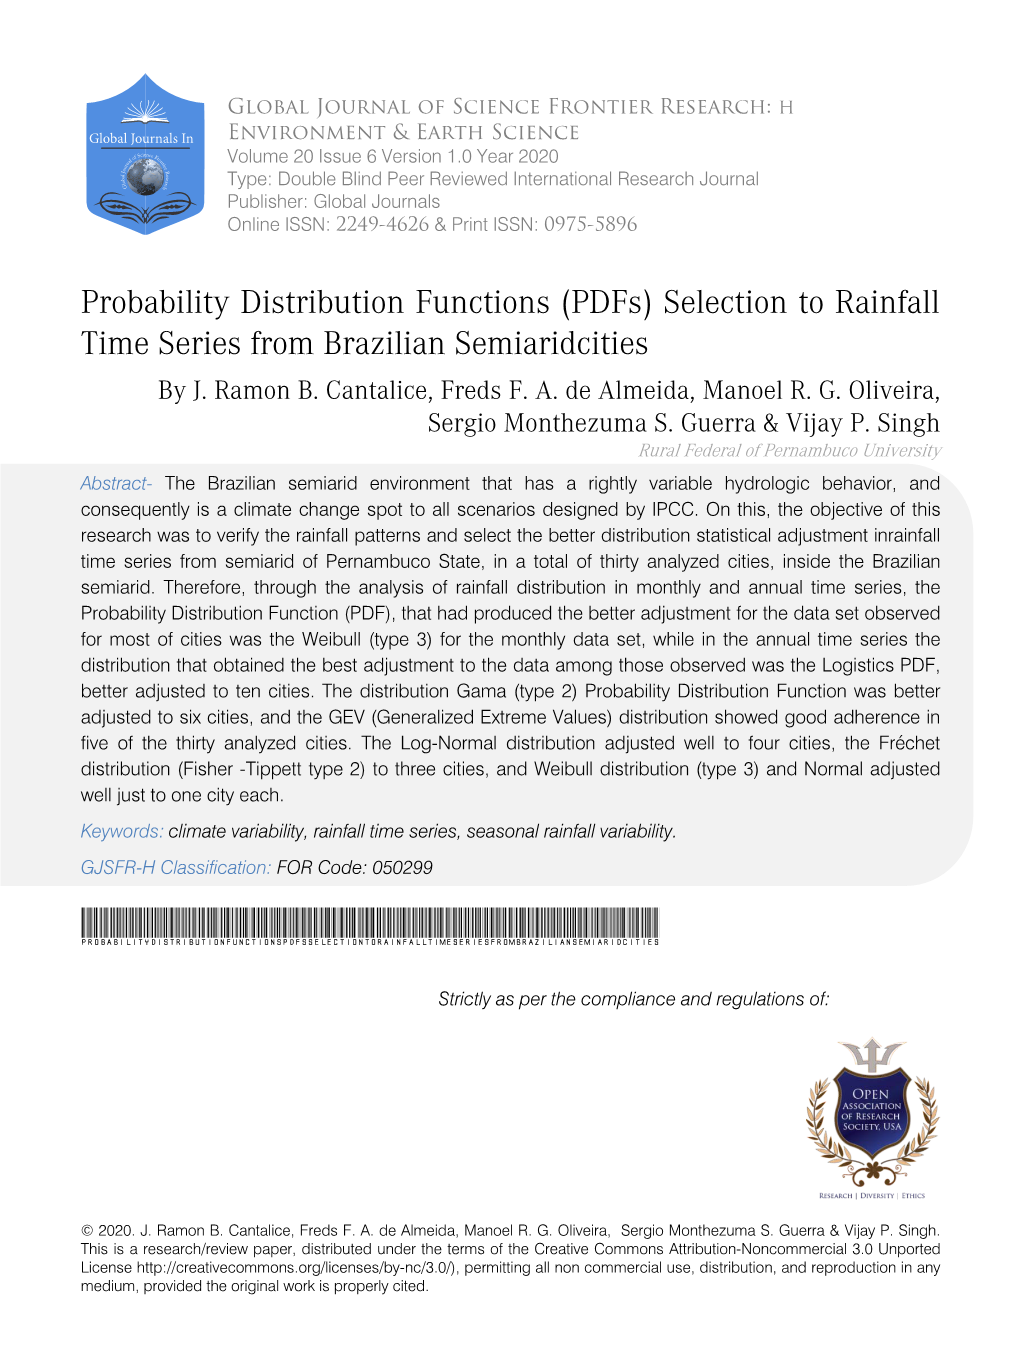 Probability Distribution Functions (Pdfs) Selection to Rainfall Time Series from Brazilian Semiaridcities by J